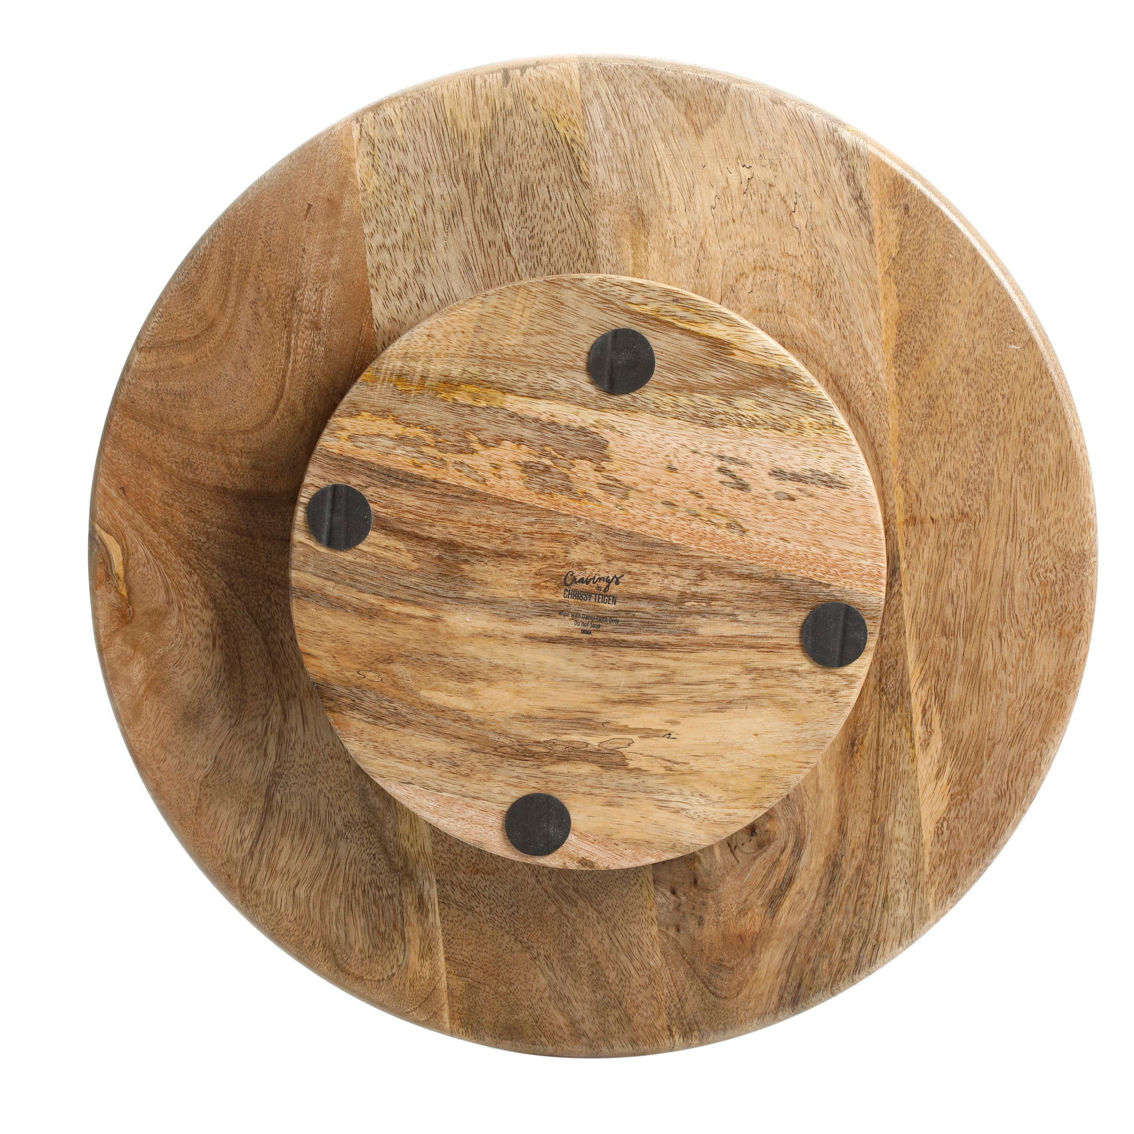 Cravings By Chrissy Teigen 16 Inch Round Mango Wood Lazy Susan with Metal Inlay - Image 3 of 4